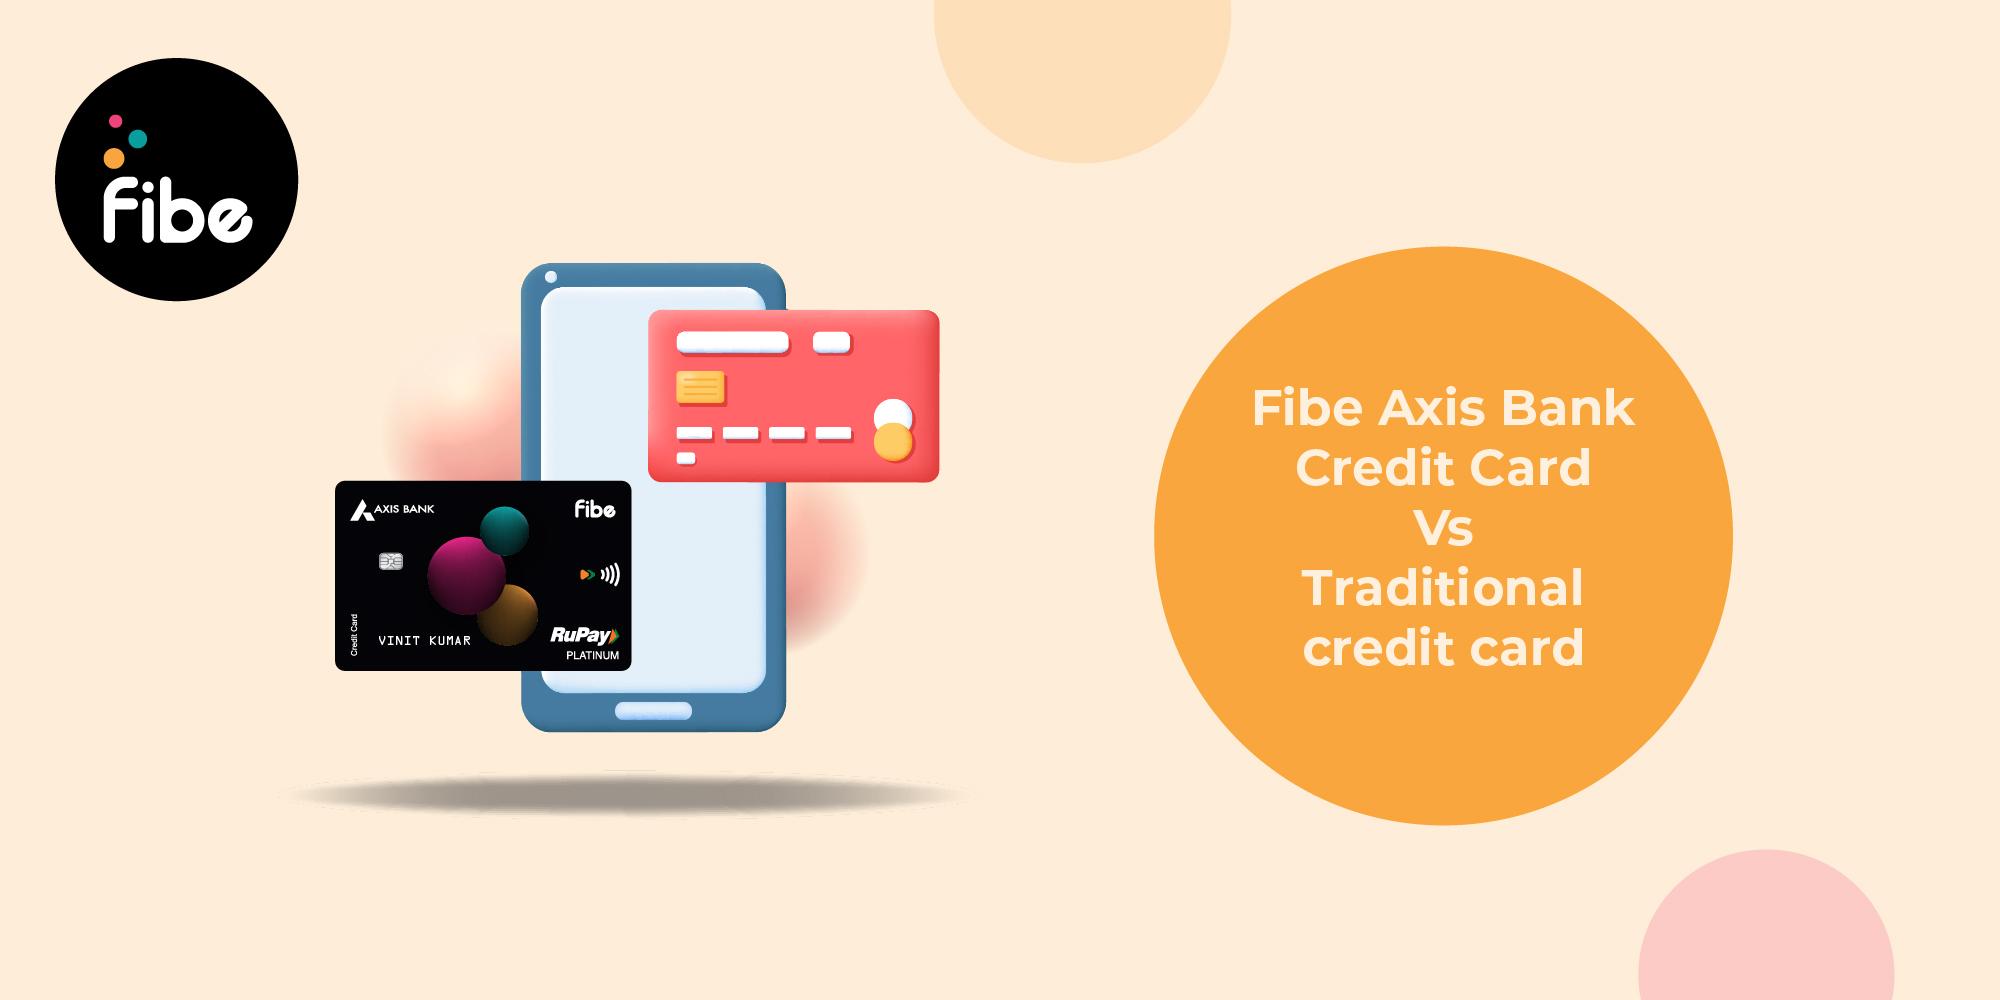 Fibe Axis Bank Credit Card vs Traditional Credit Card: All You Need to Know